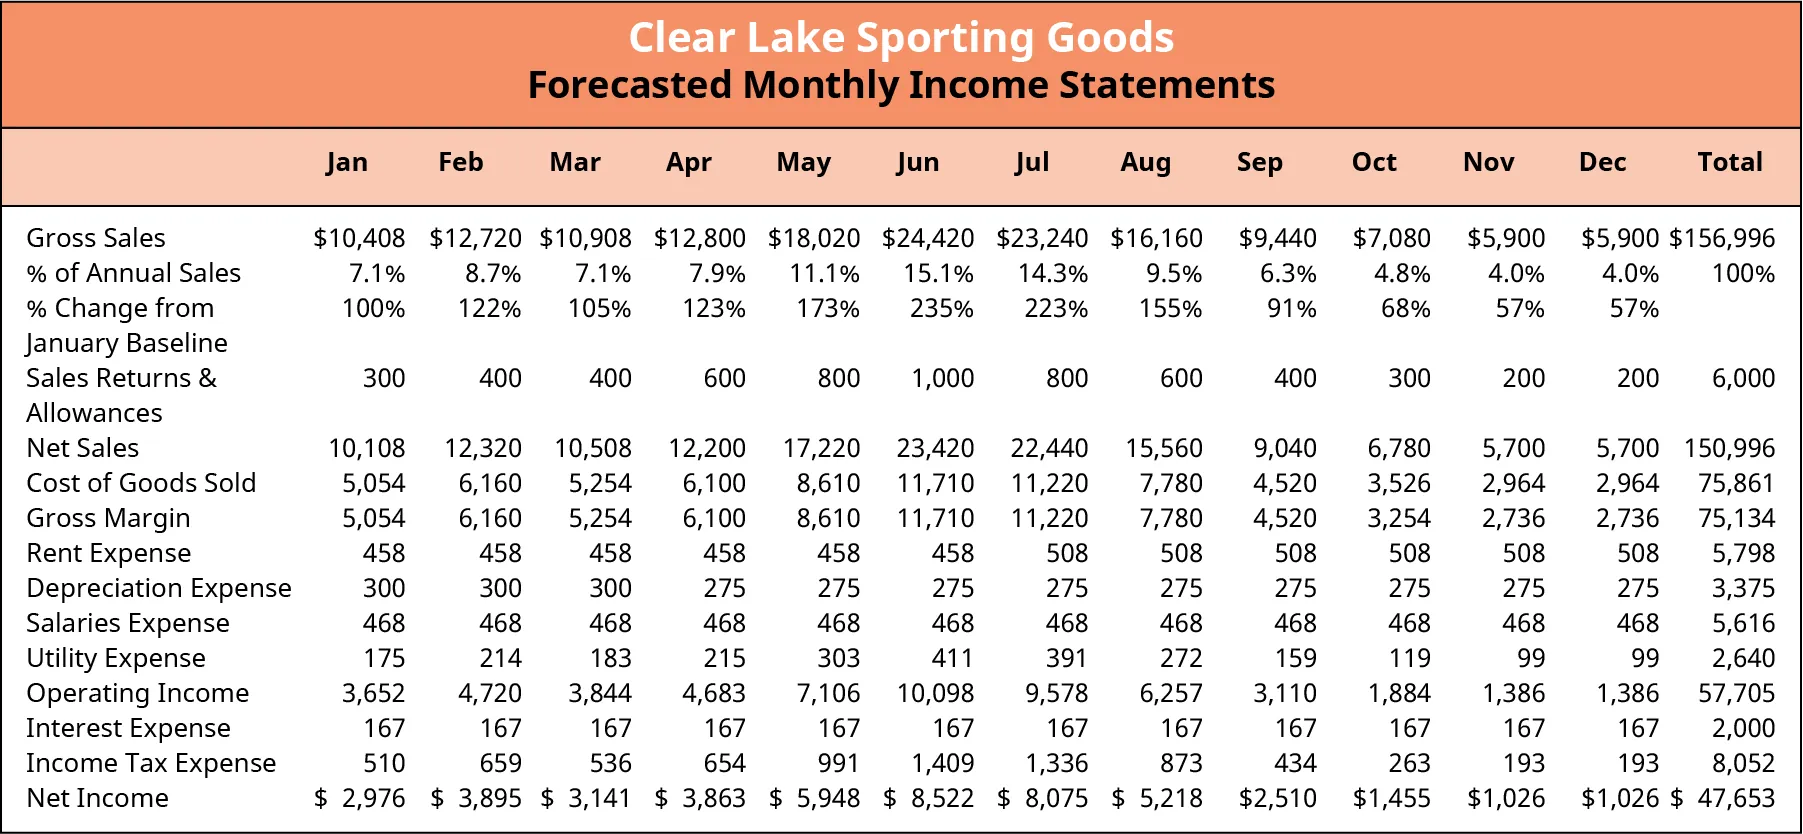 The forecasted monthly income statement for Clear Lake Sporting Goods shows the gross monthly sales forecasts from January to December, as well as the forecasted monthly expenses. The monthly net income is calculated by subtracting the expenses from the net sales. The annual gross sales, net sales, expenses, and net income are calculated as well.